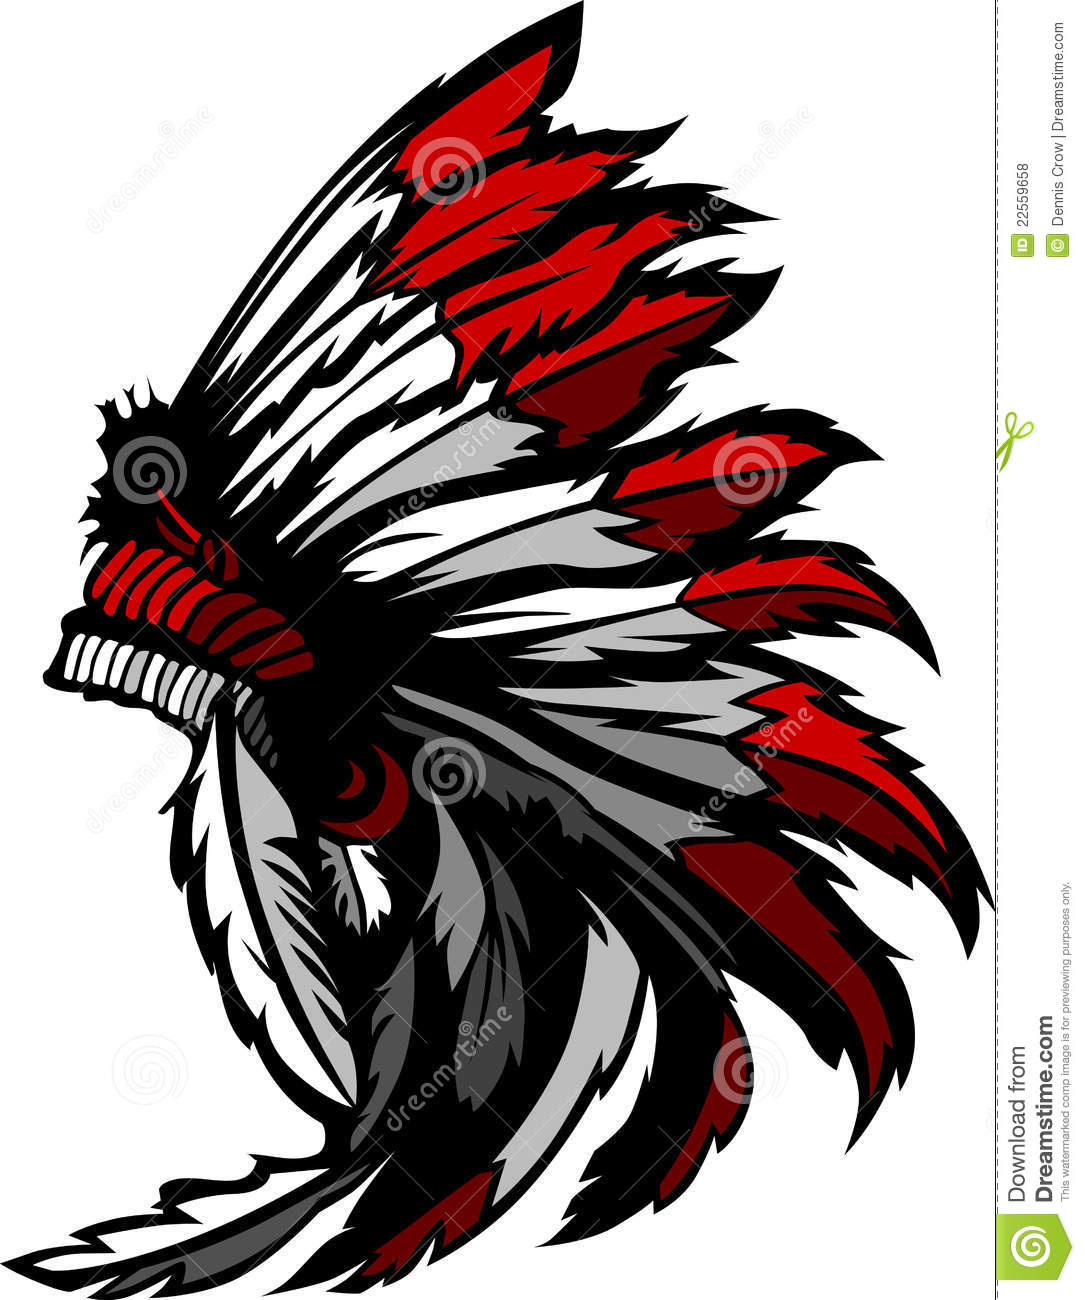 American Native Indian Feather Headress Royalty Free Stock Photos